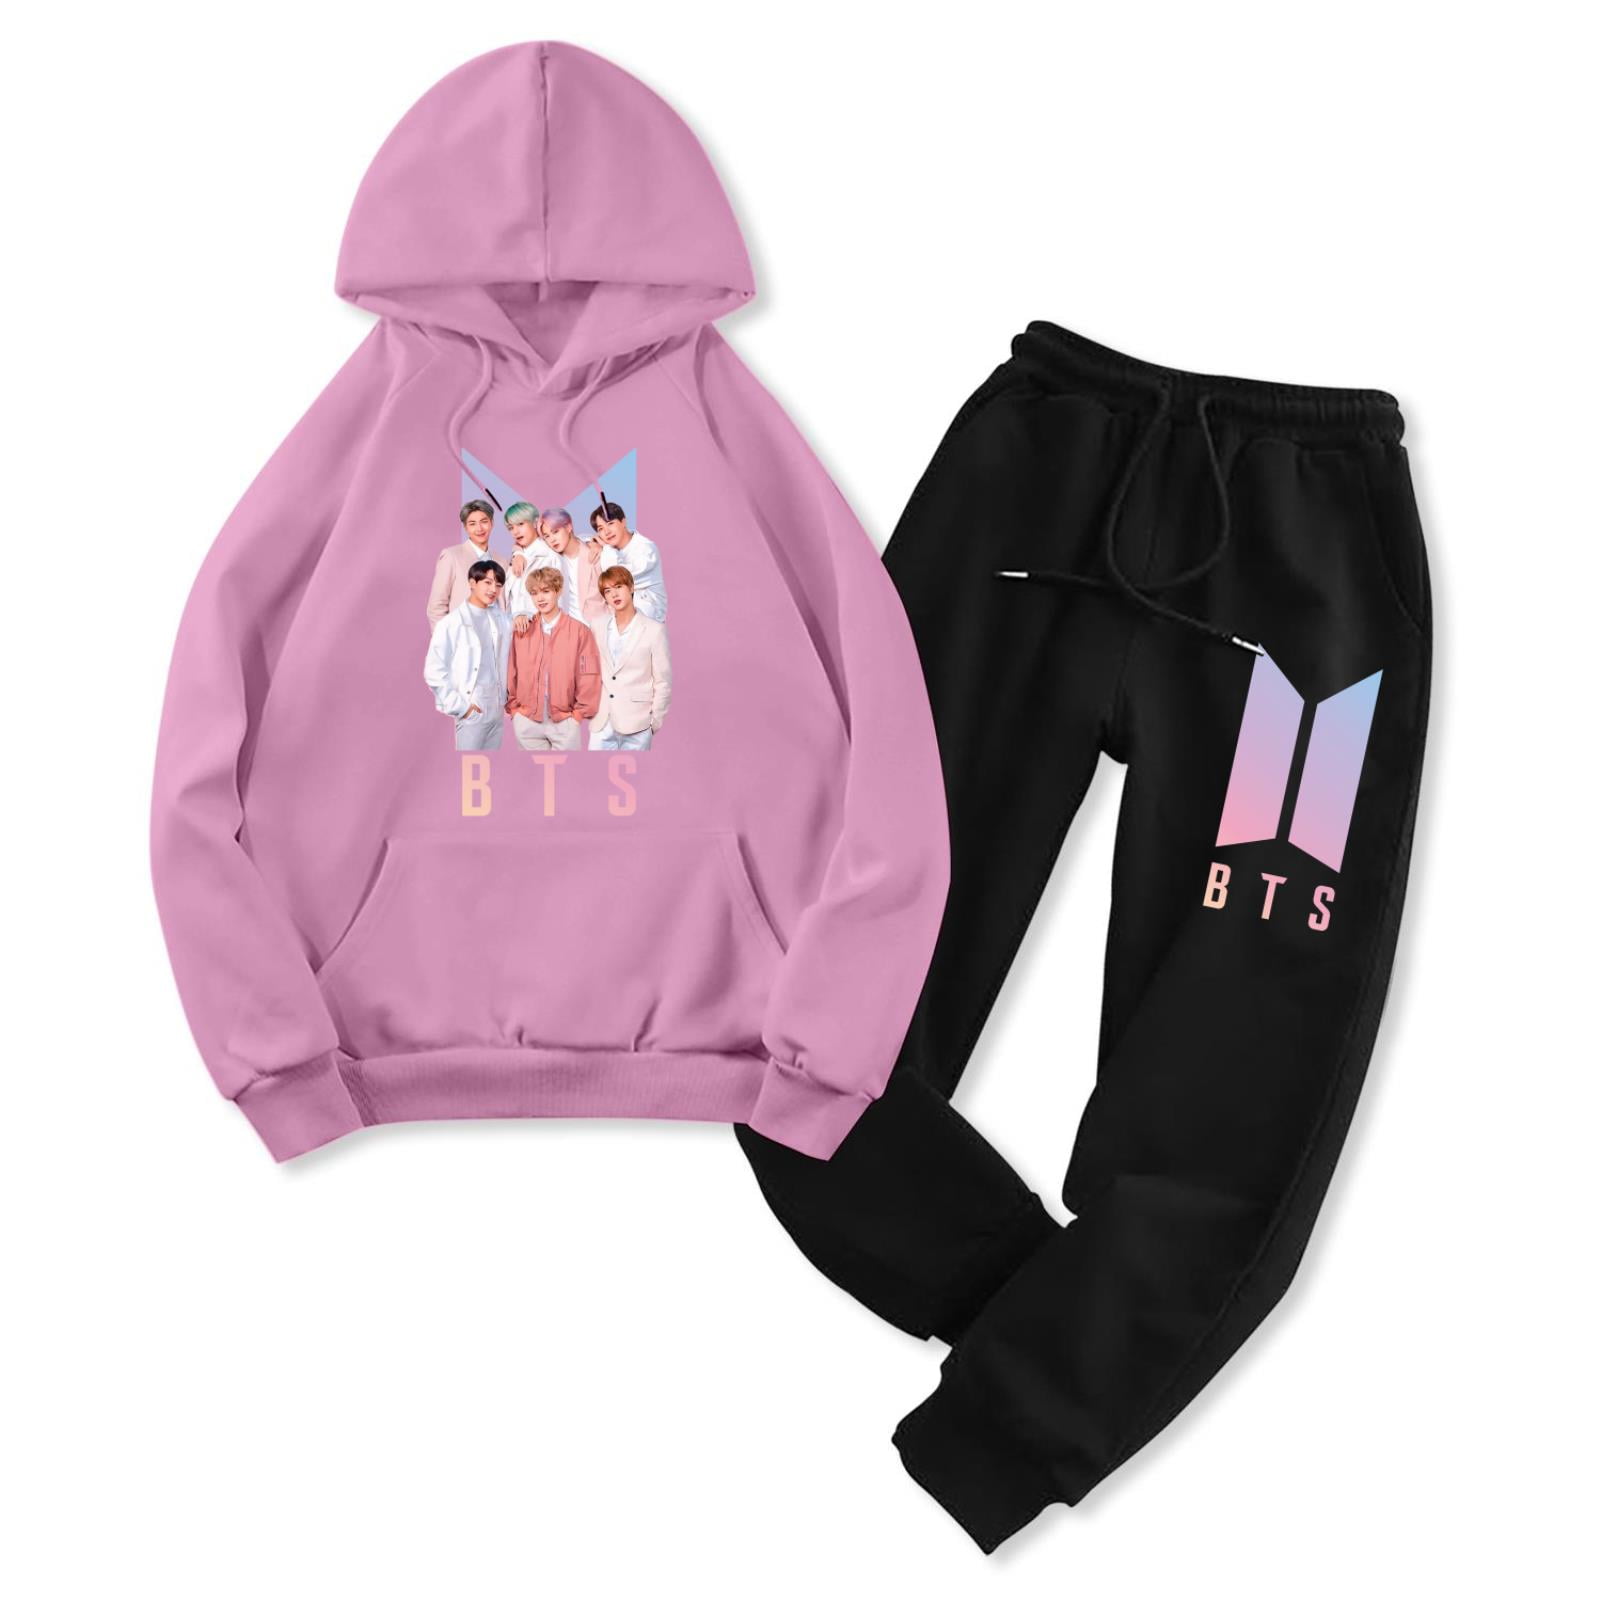 Pin by Sweet ฯ Ω on Fashion Olga  Bts clothing, Bts hoodie, Bts inspired  outfits